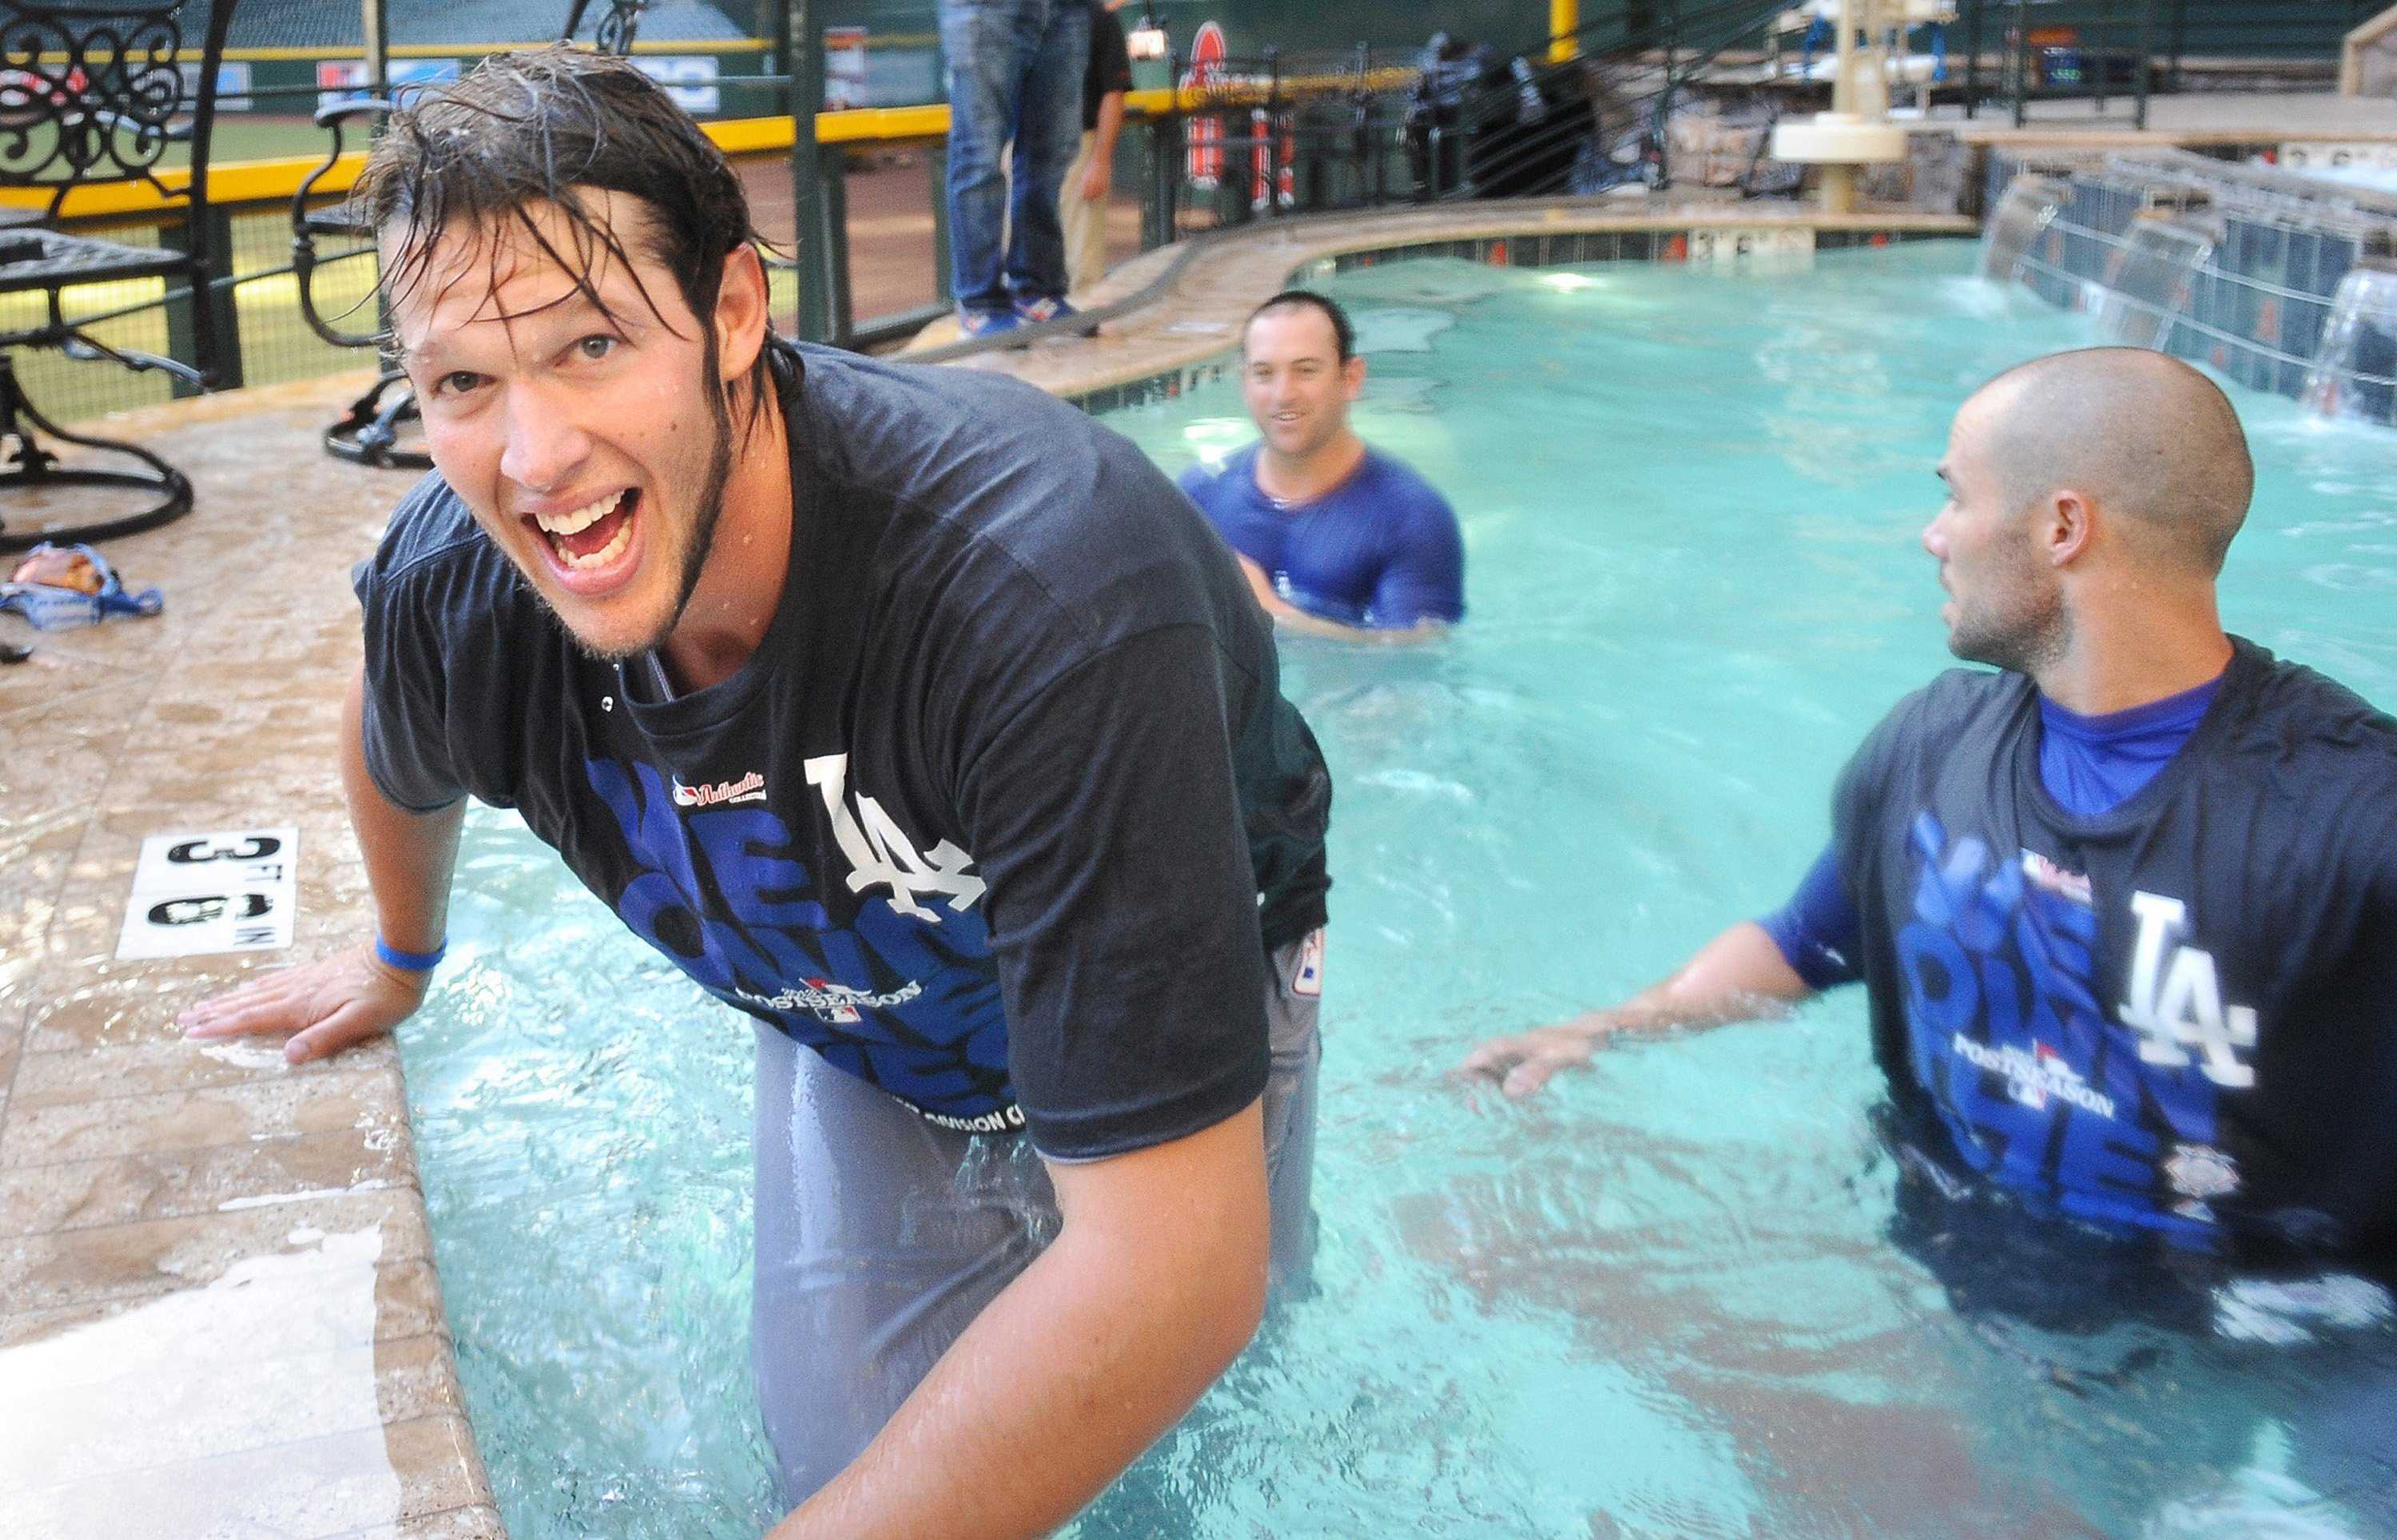 Dodgers players hangout in a pool